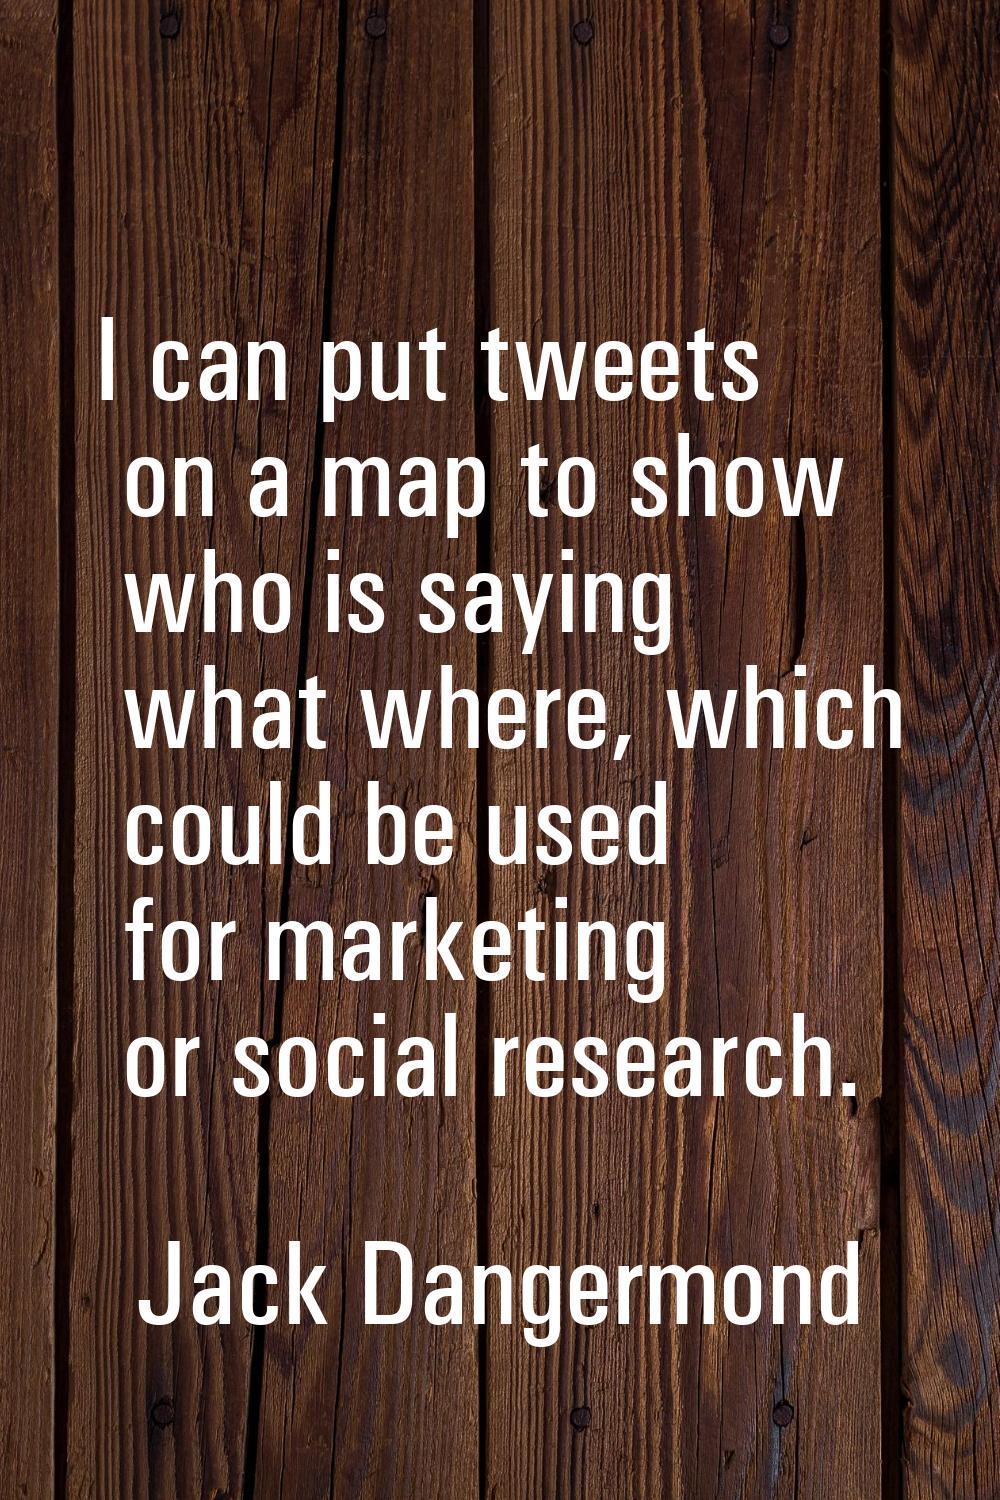 I can put tweets on a map to show who is saying what where, which could be used for marketing or so